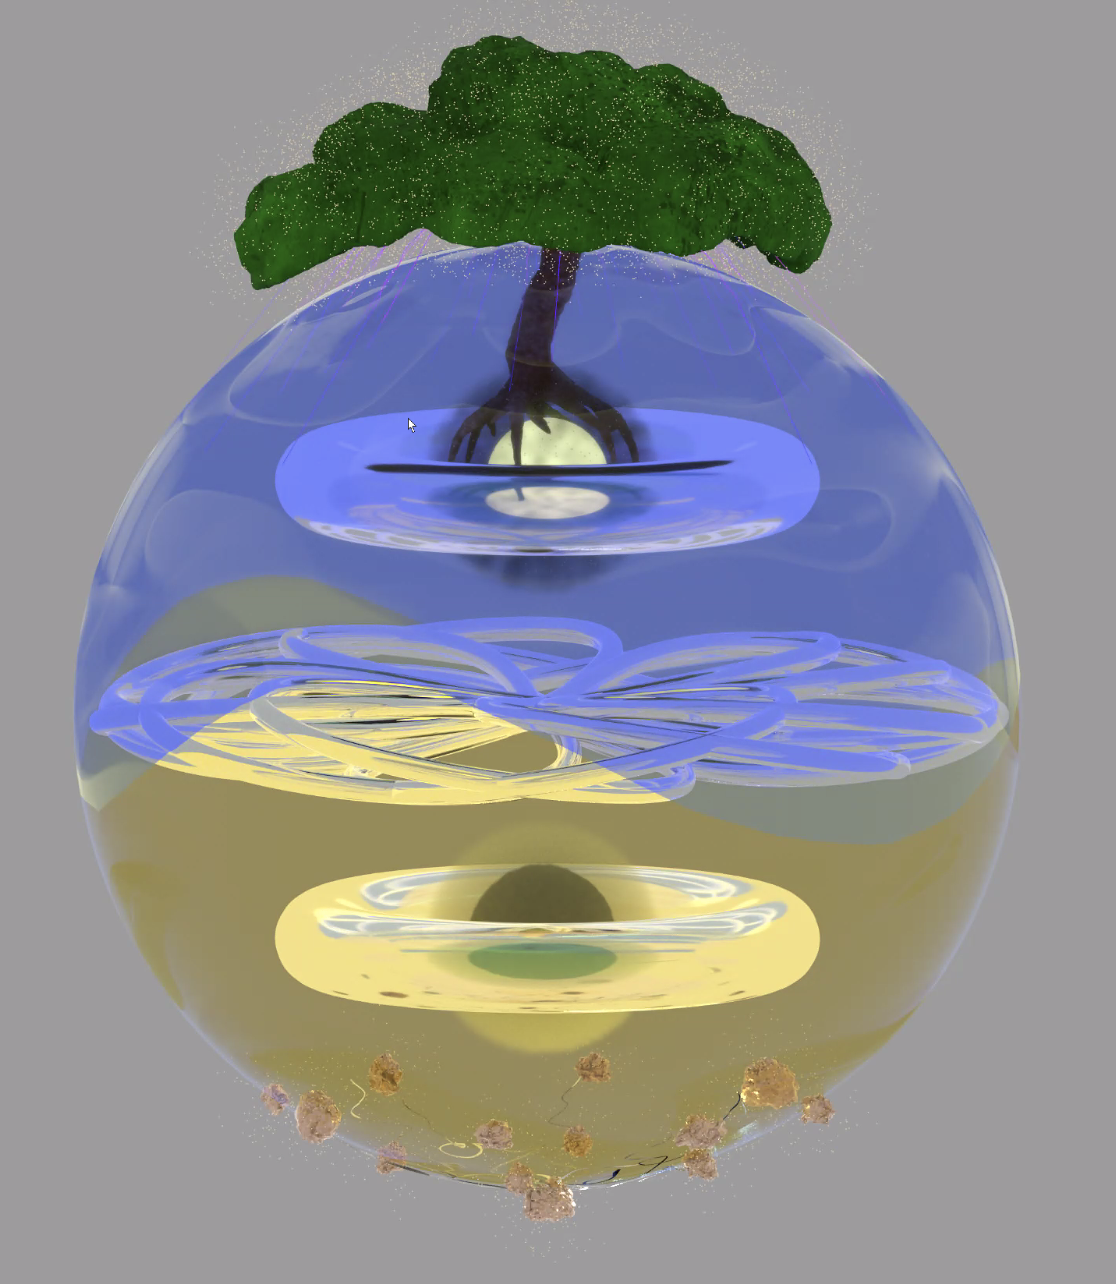 A graphic representation of The Winding Path to Wisdom. It's sort of a yin-yang symbol, dark blue at the top, and bright yellow on the bottom. There are organic features such as a big tree with visible roots. This is a 3D-rendered representation of the previous image, without any labels.